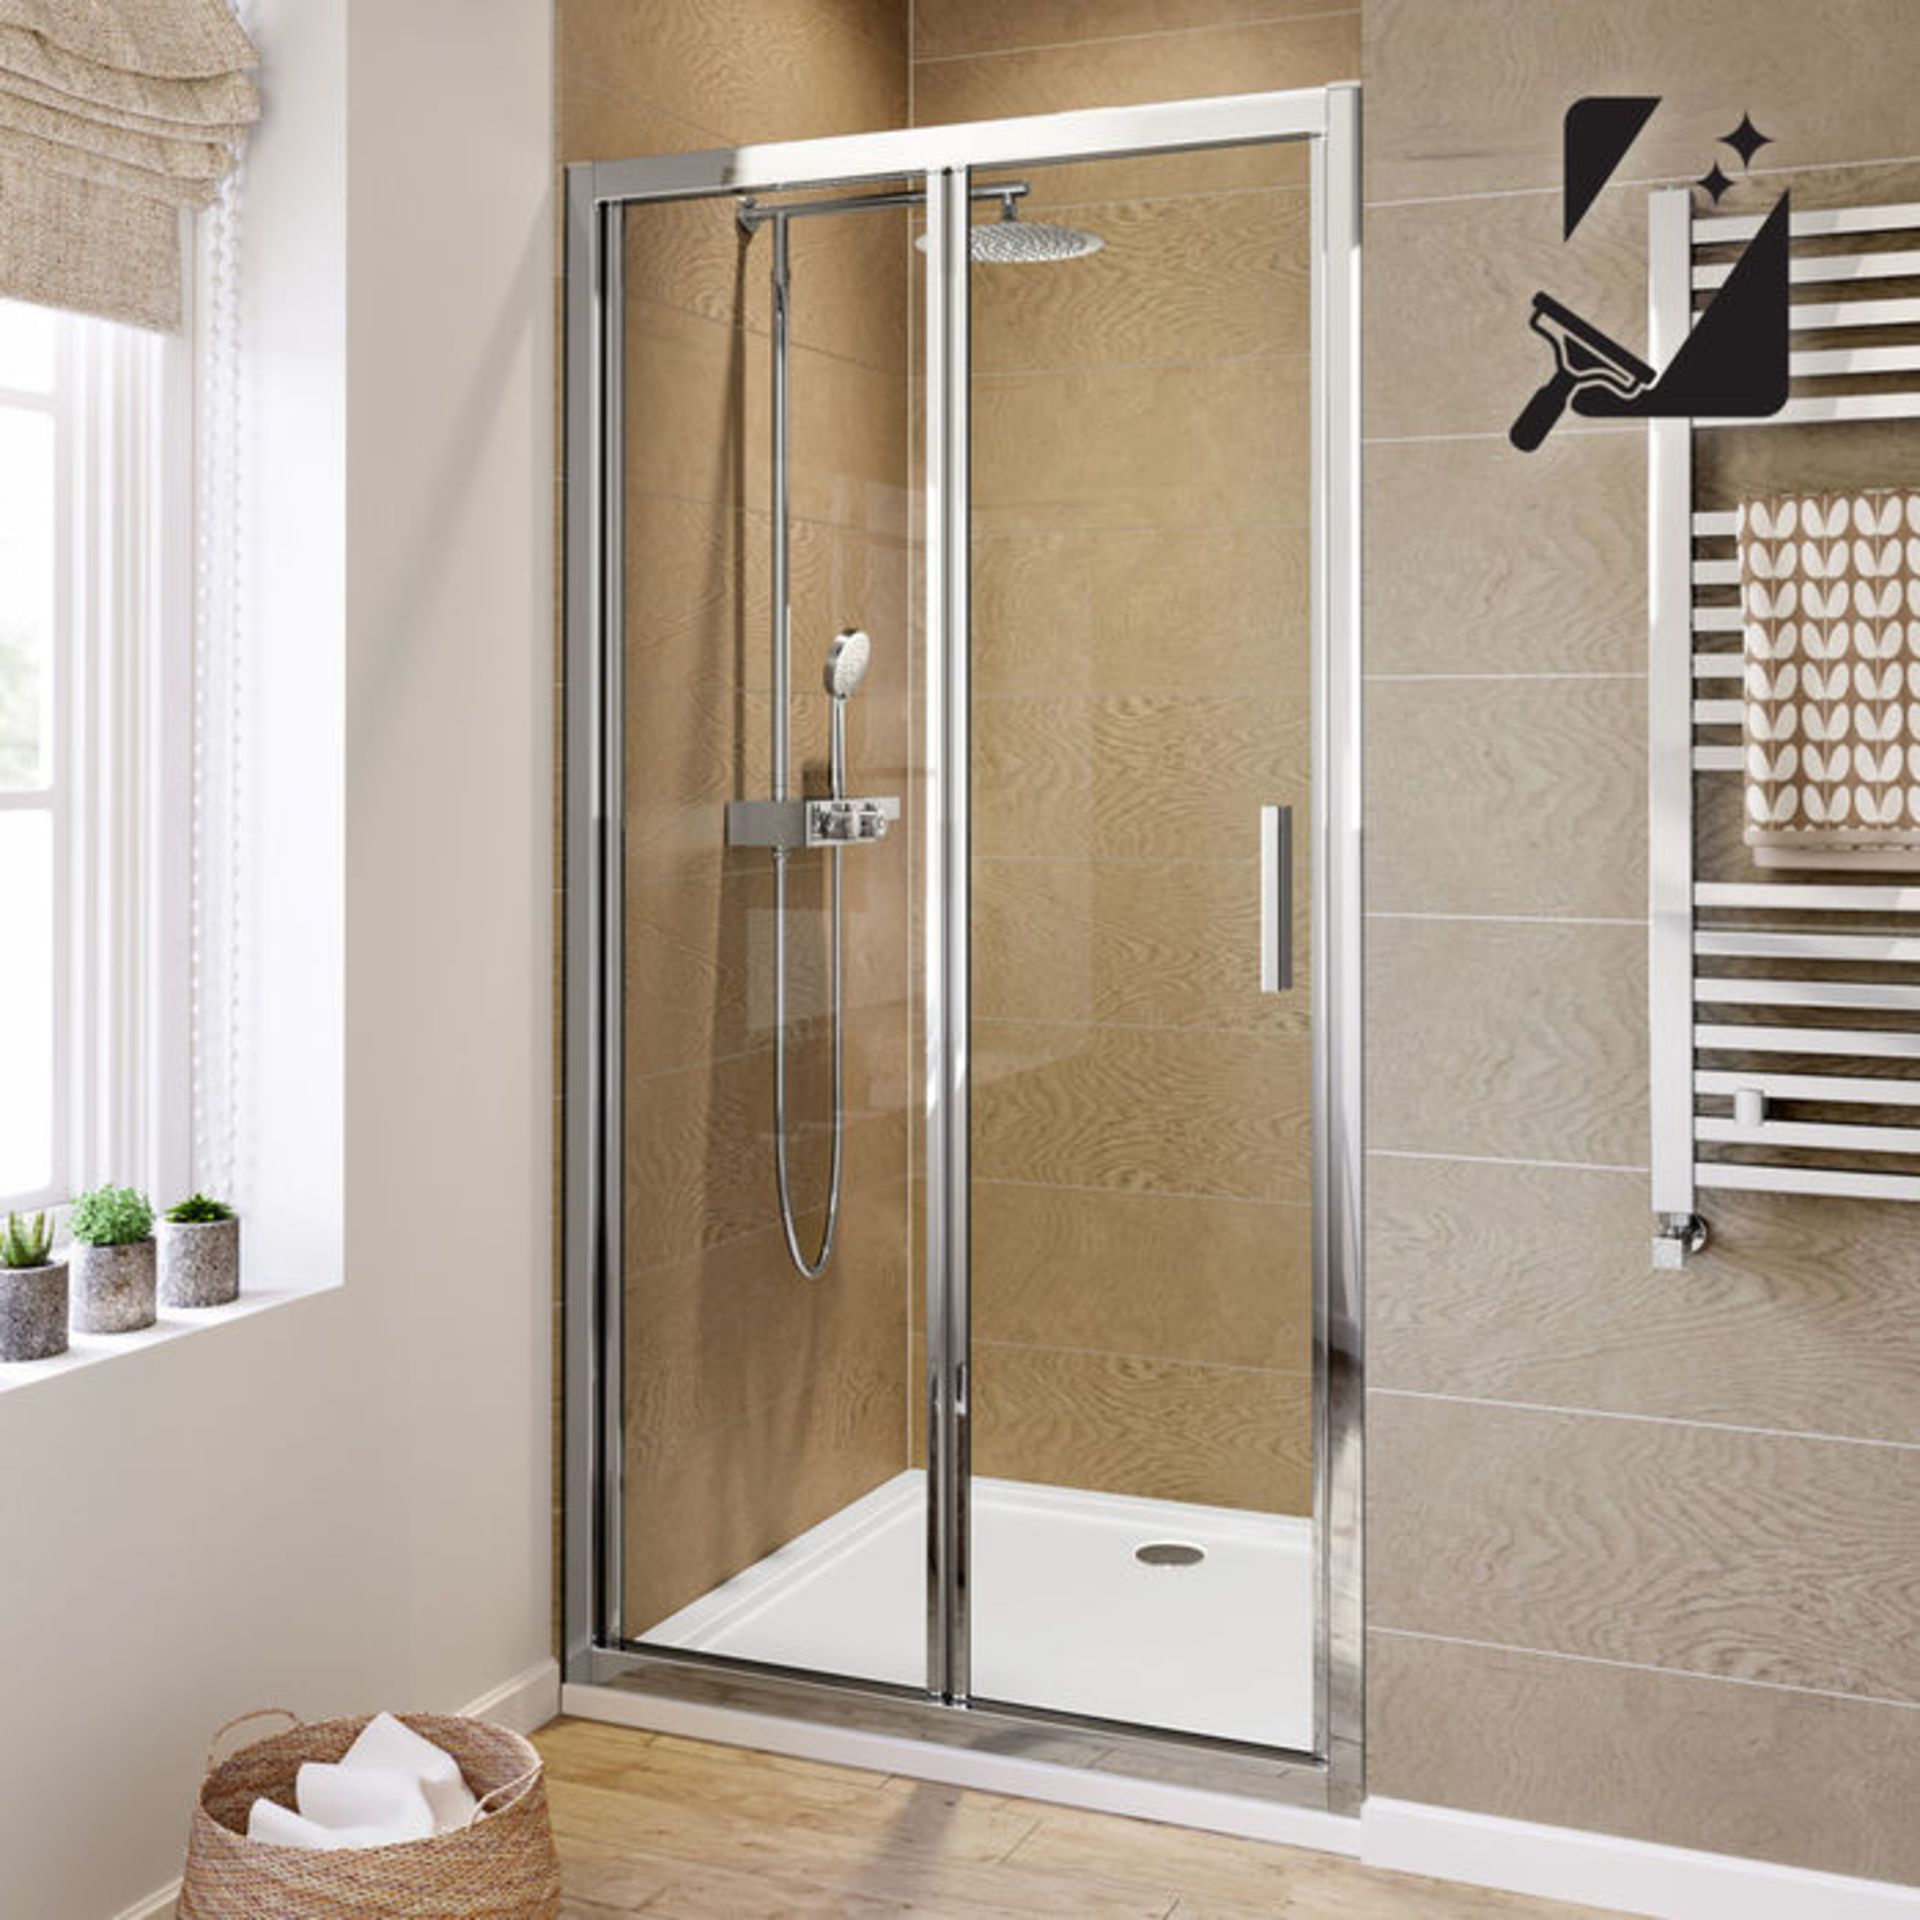 (XS307) 1000mm - 6mm - Elements EasyClean Bifold Shower Door. RRP £299.99. 6mm Safety Glass - - Image 6 of 6